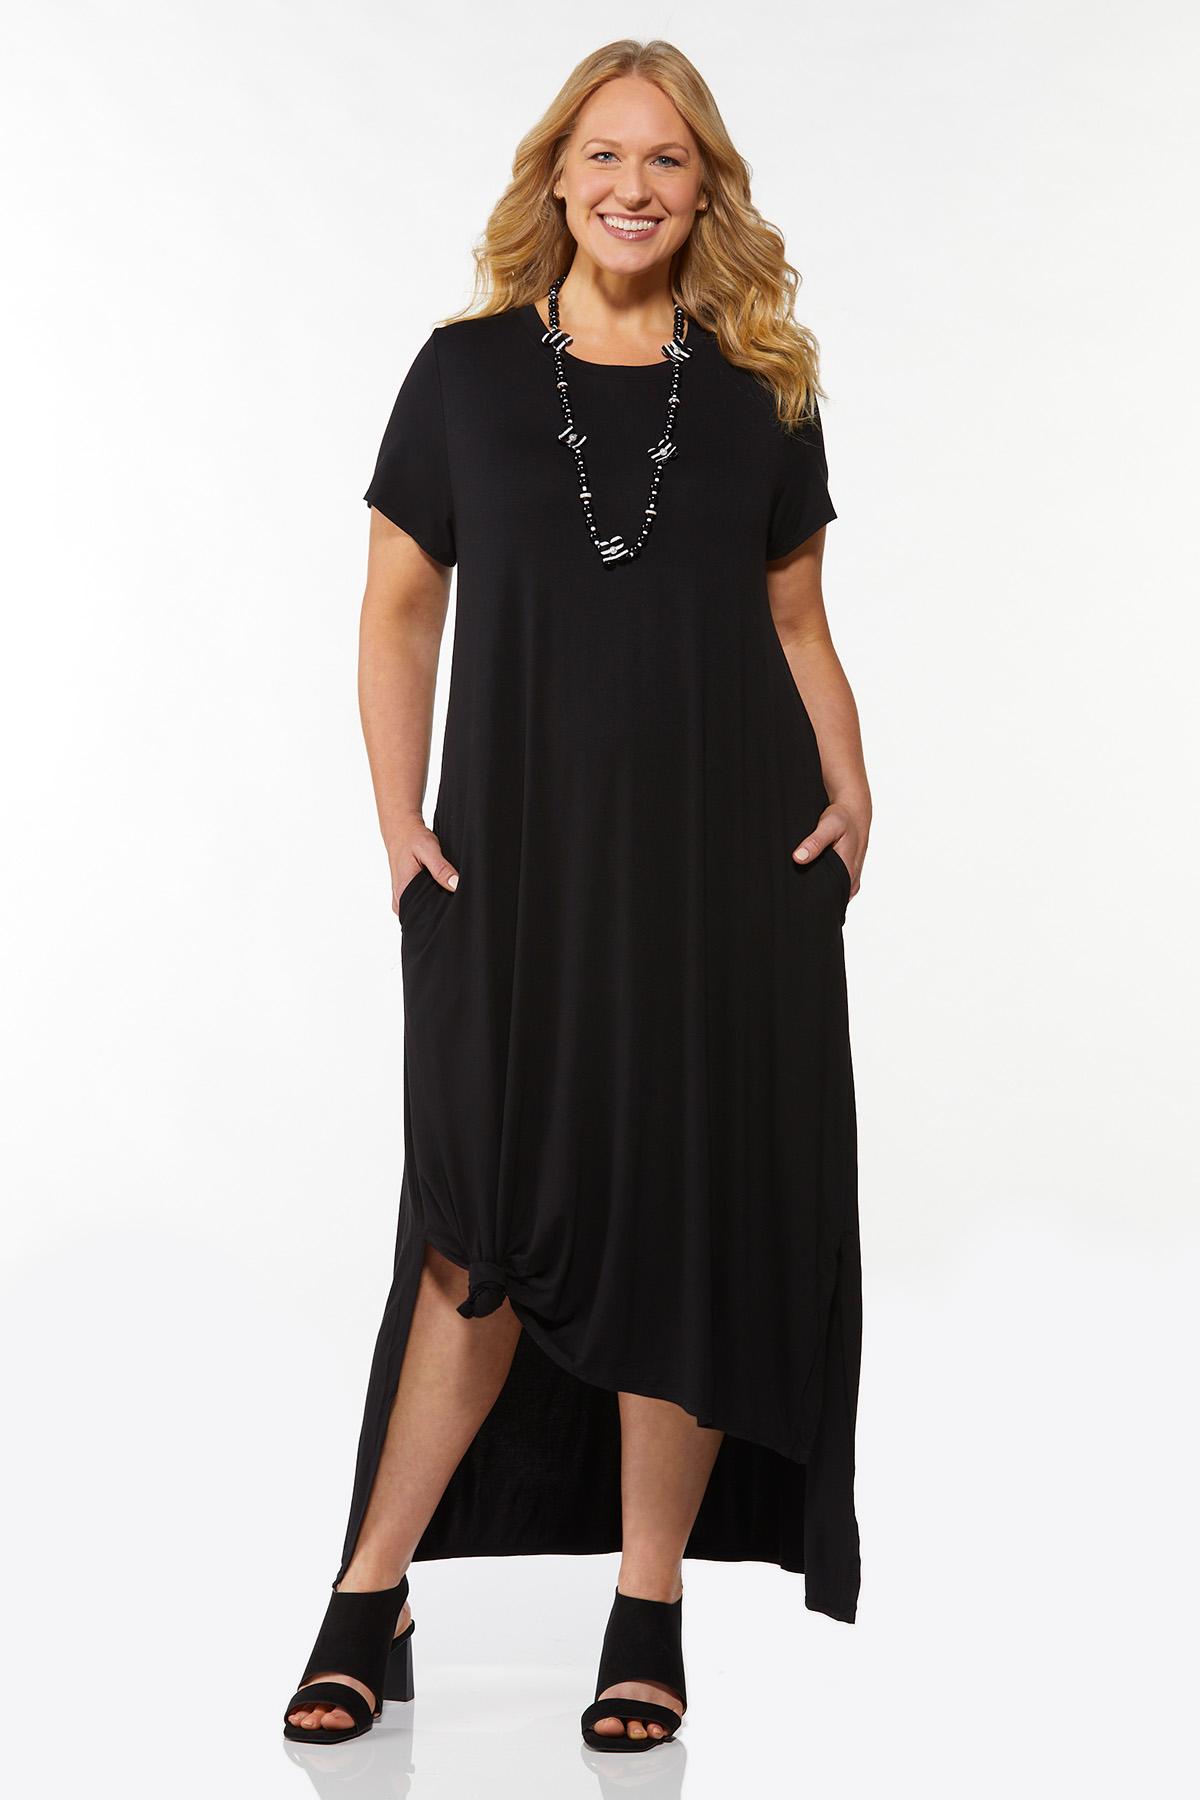 Plus Size Knotted Tee Shirt Maxi Dress